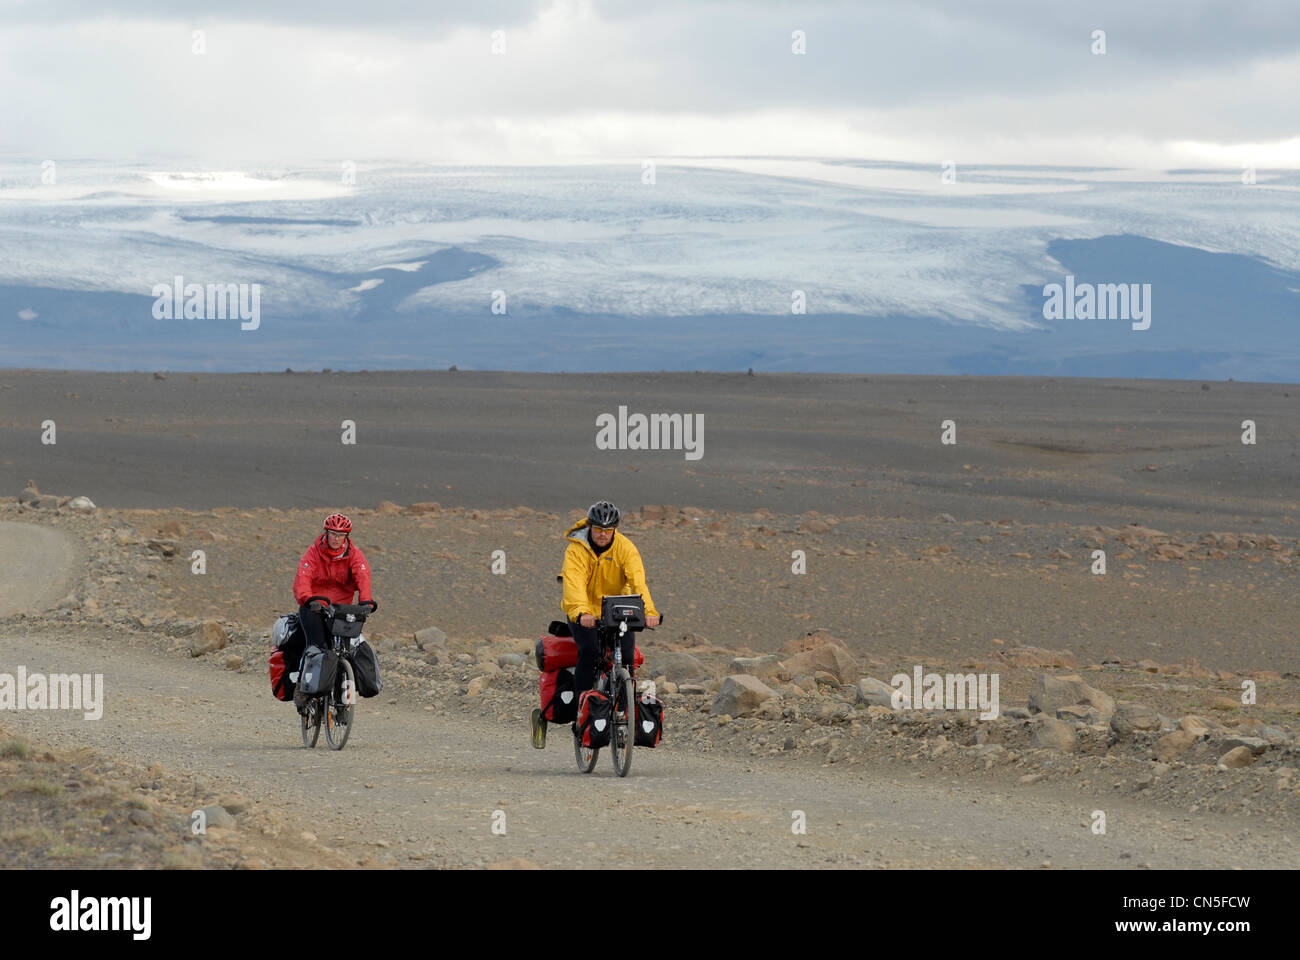 Iceland, Nordurland Vestra Region, two cyclists on the track of Kjolur in a desert landscape with a glacier in the background Stock Photo